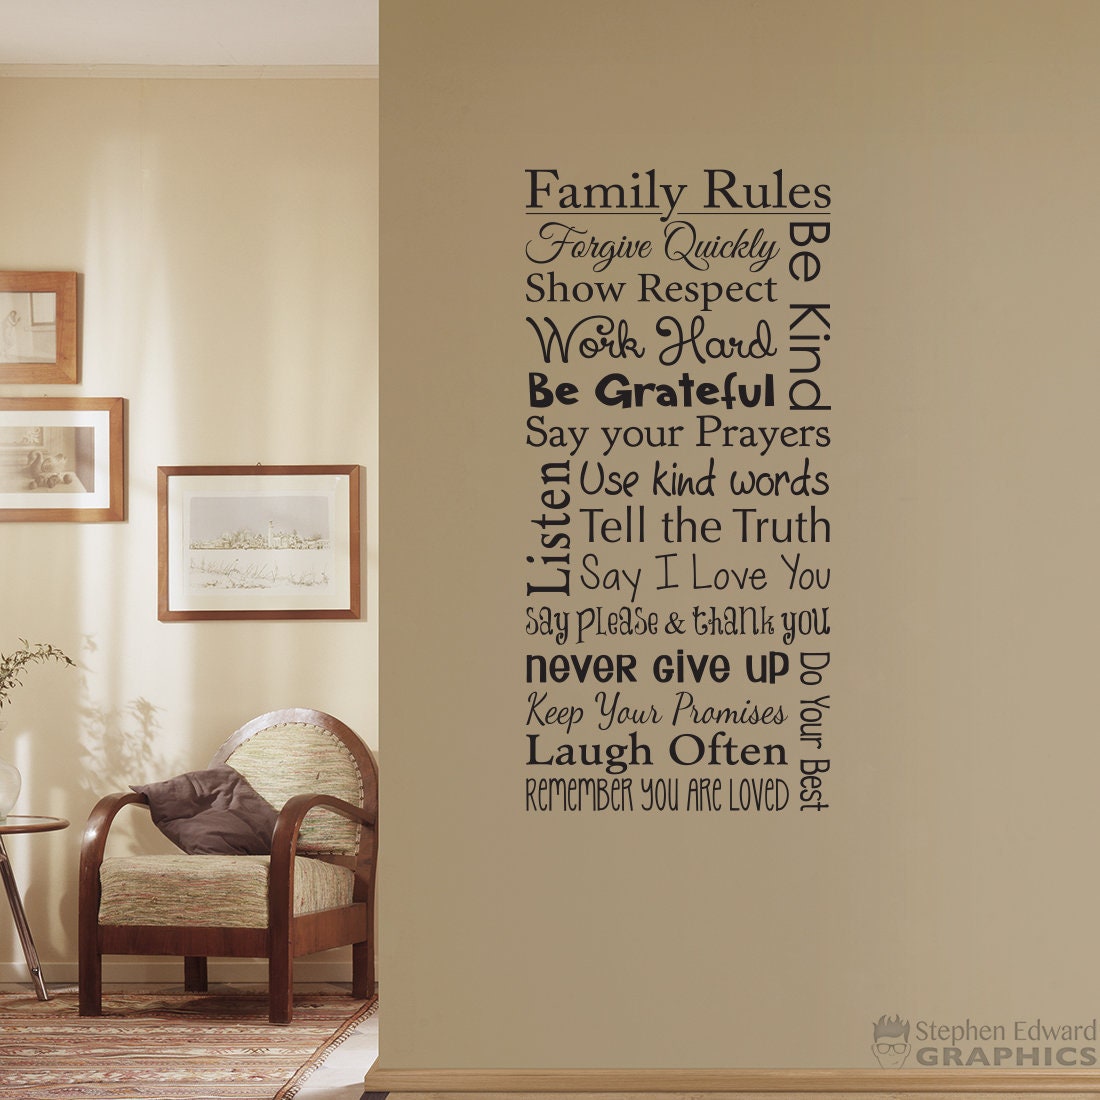 Family Rules Wall Decal | Show Respect Use Kind Words Never Give Up Do your Best | Family Decor | Vertical